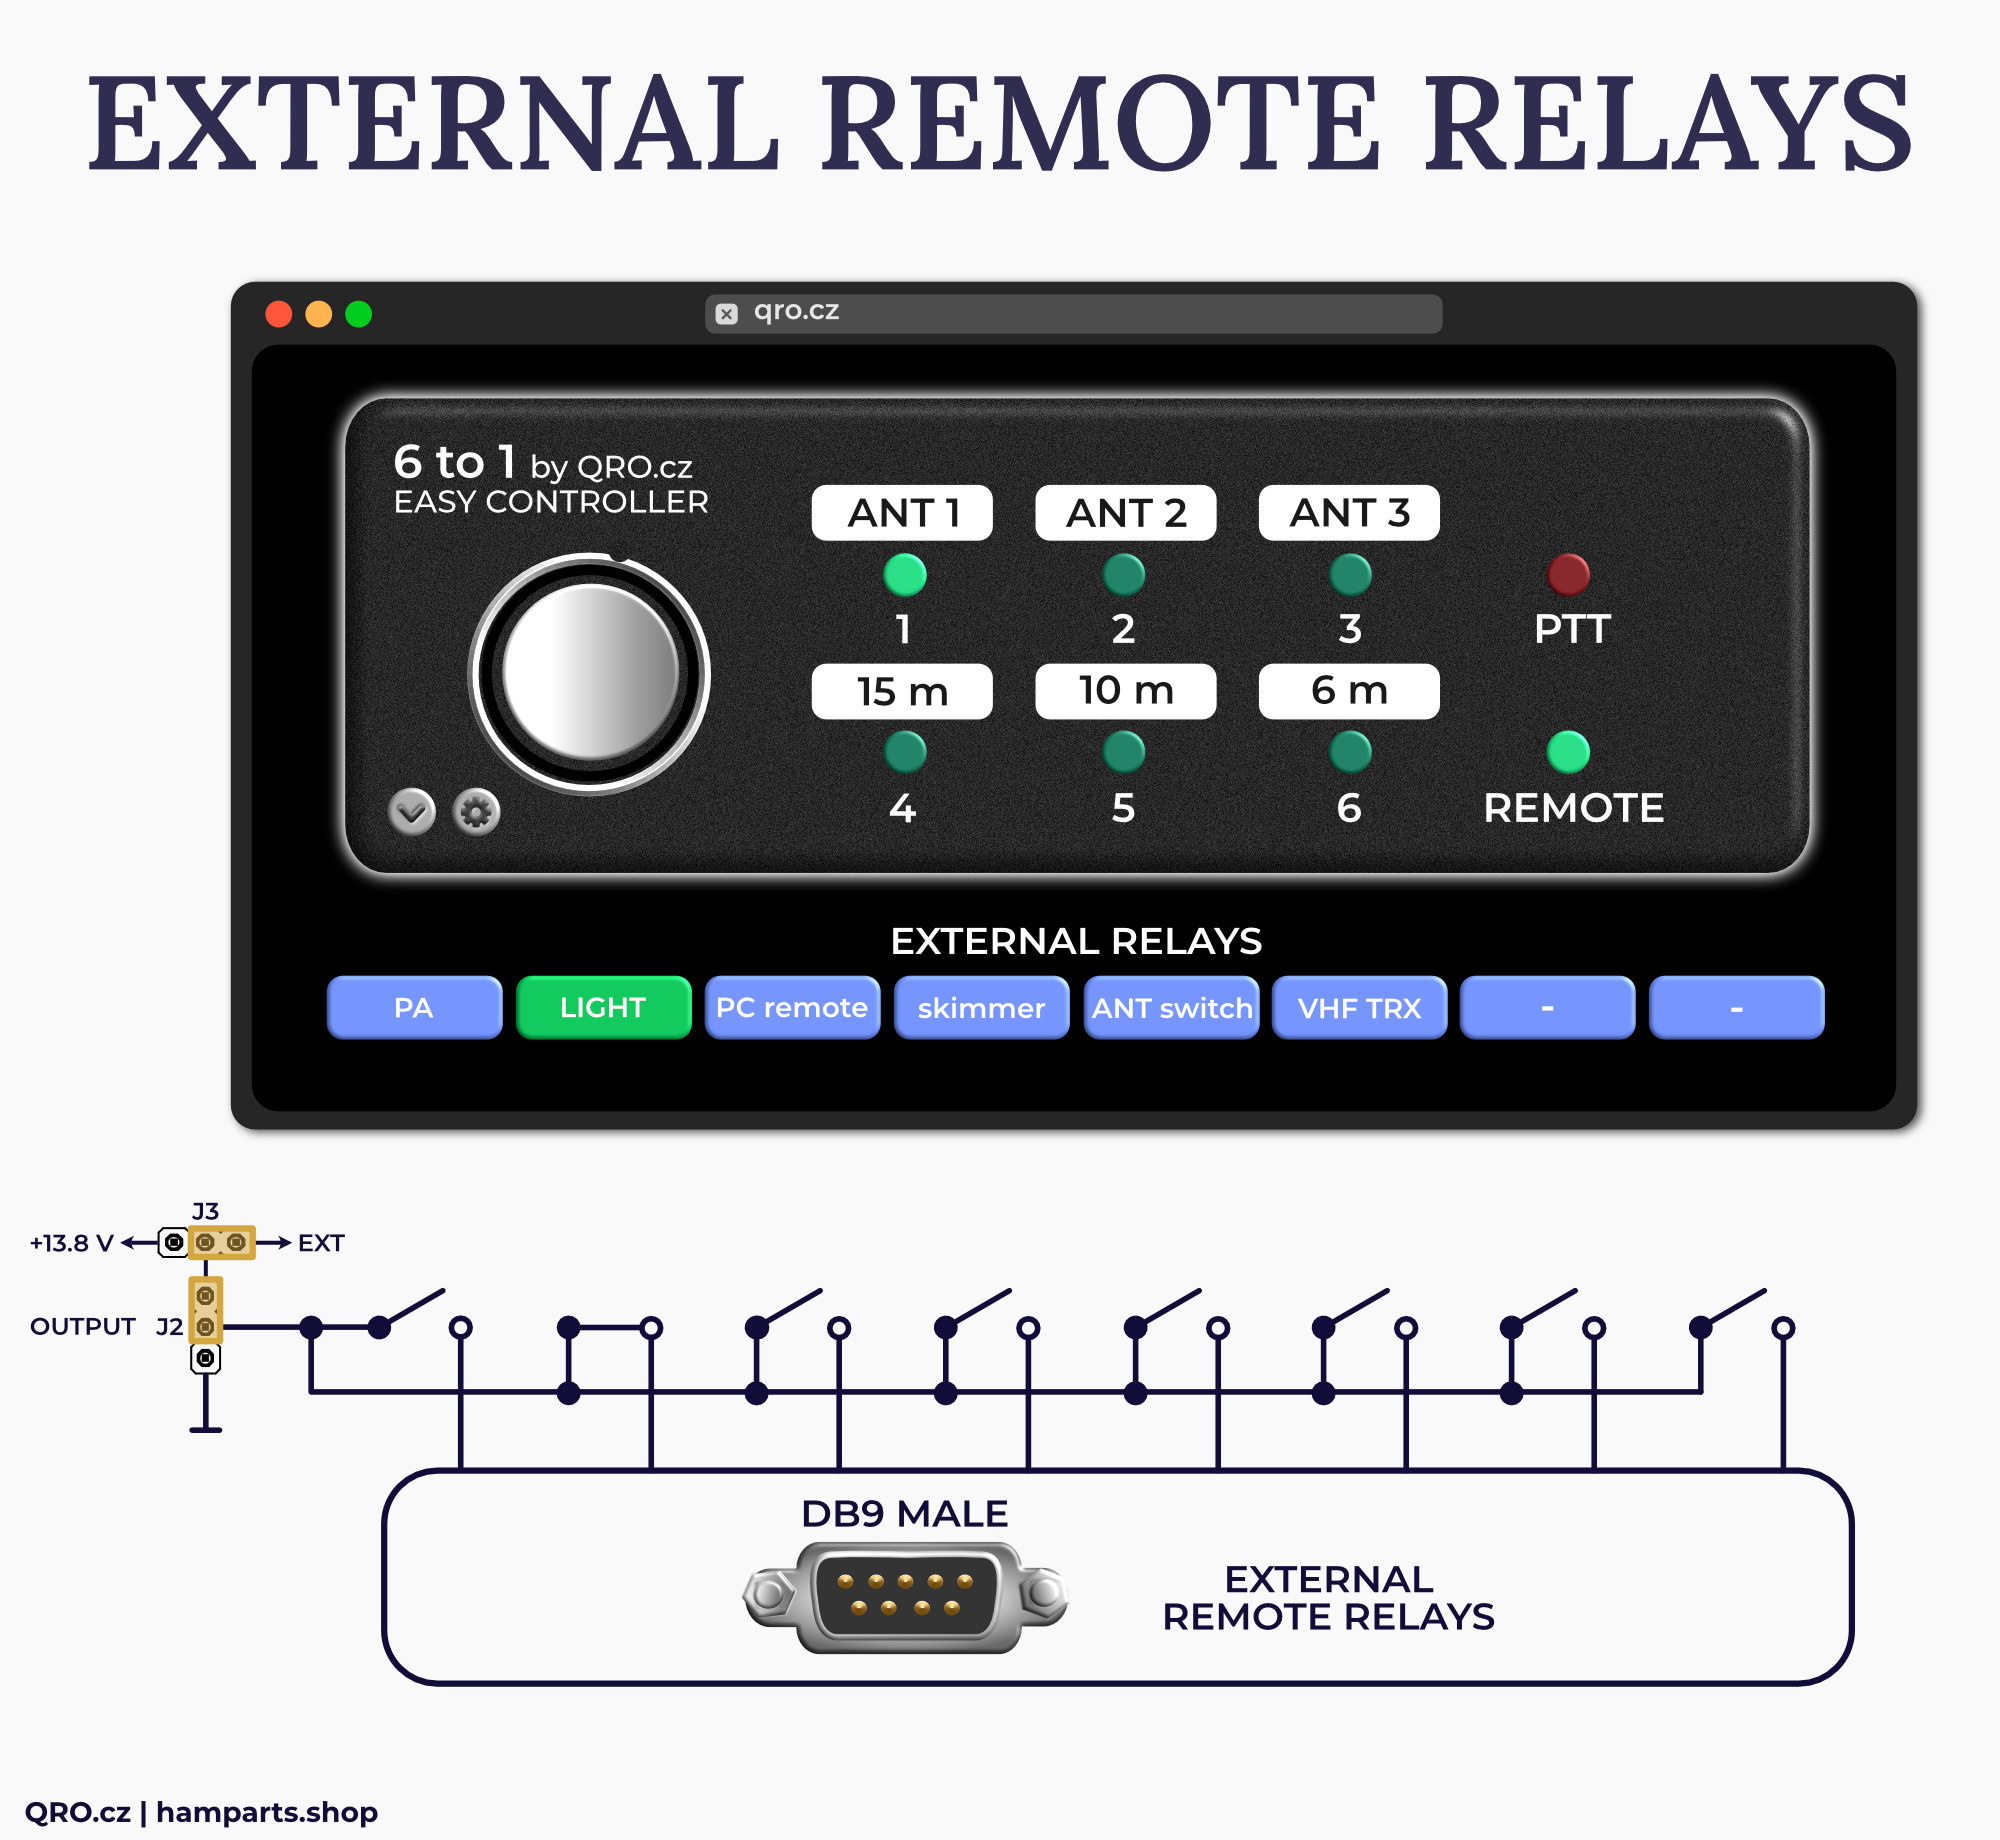 easy controller for 6-1 antenna switch example of external relays by qro.cz hamparts.shop